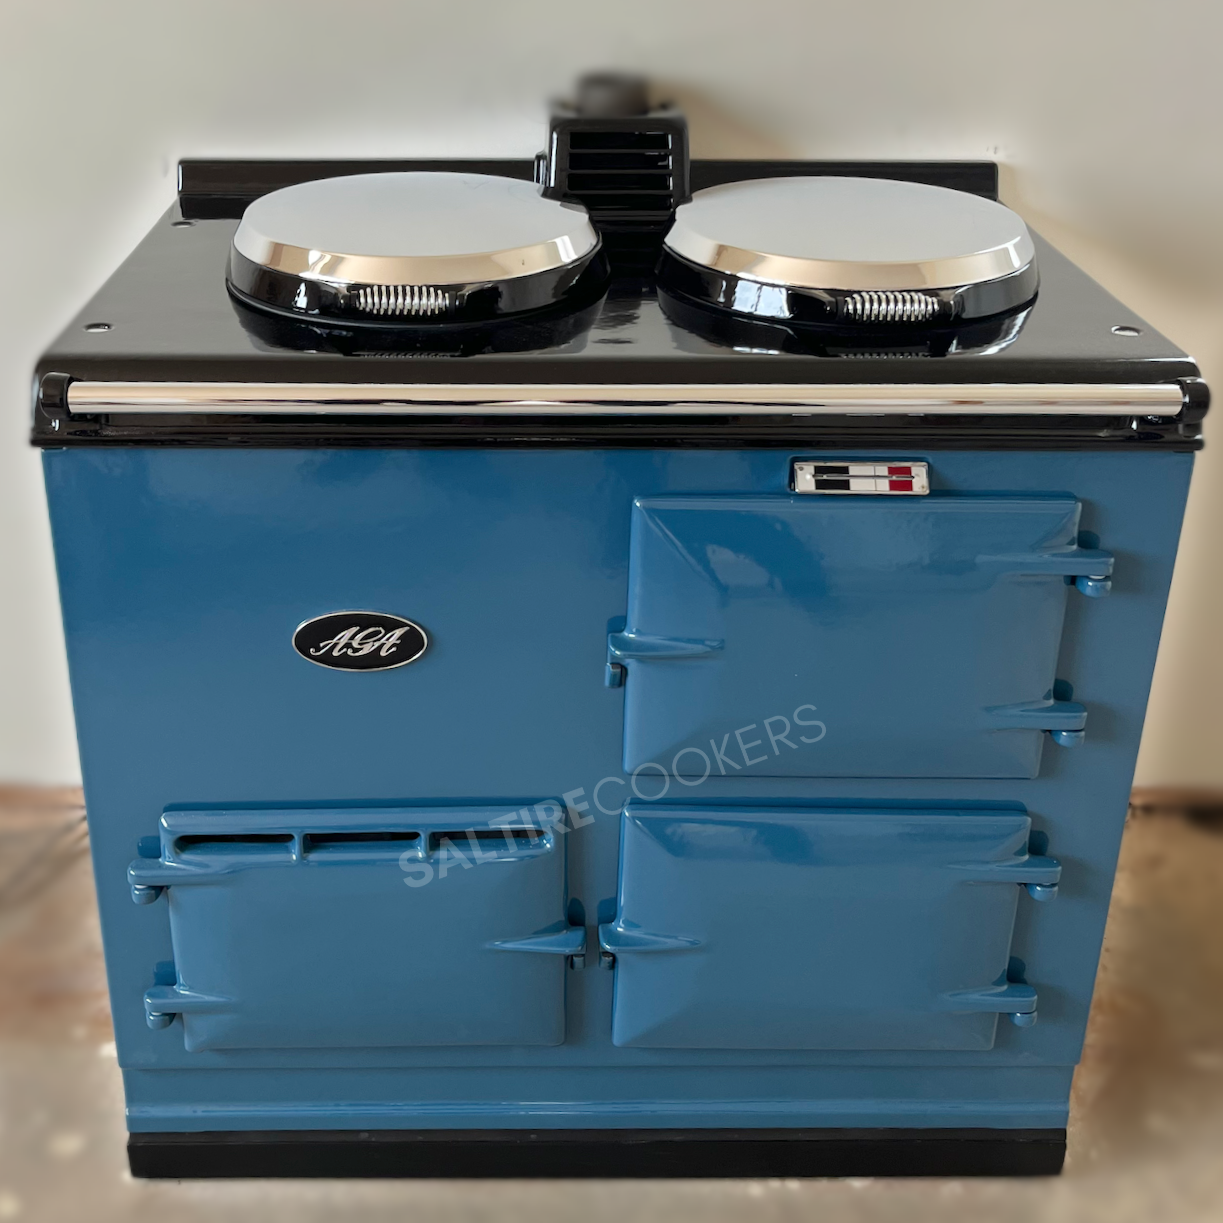 Reconditioned 2 Oven Oil Aga Cooker (Peacock)